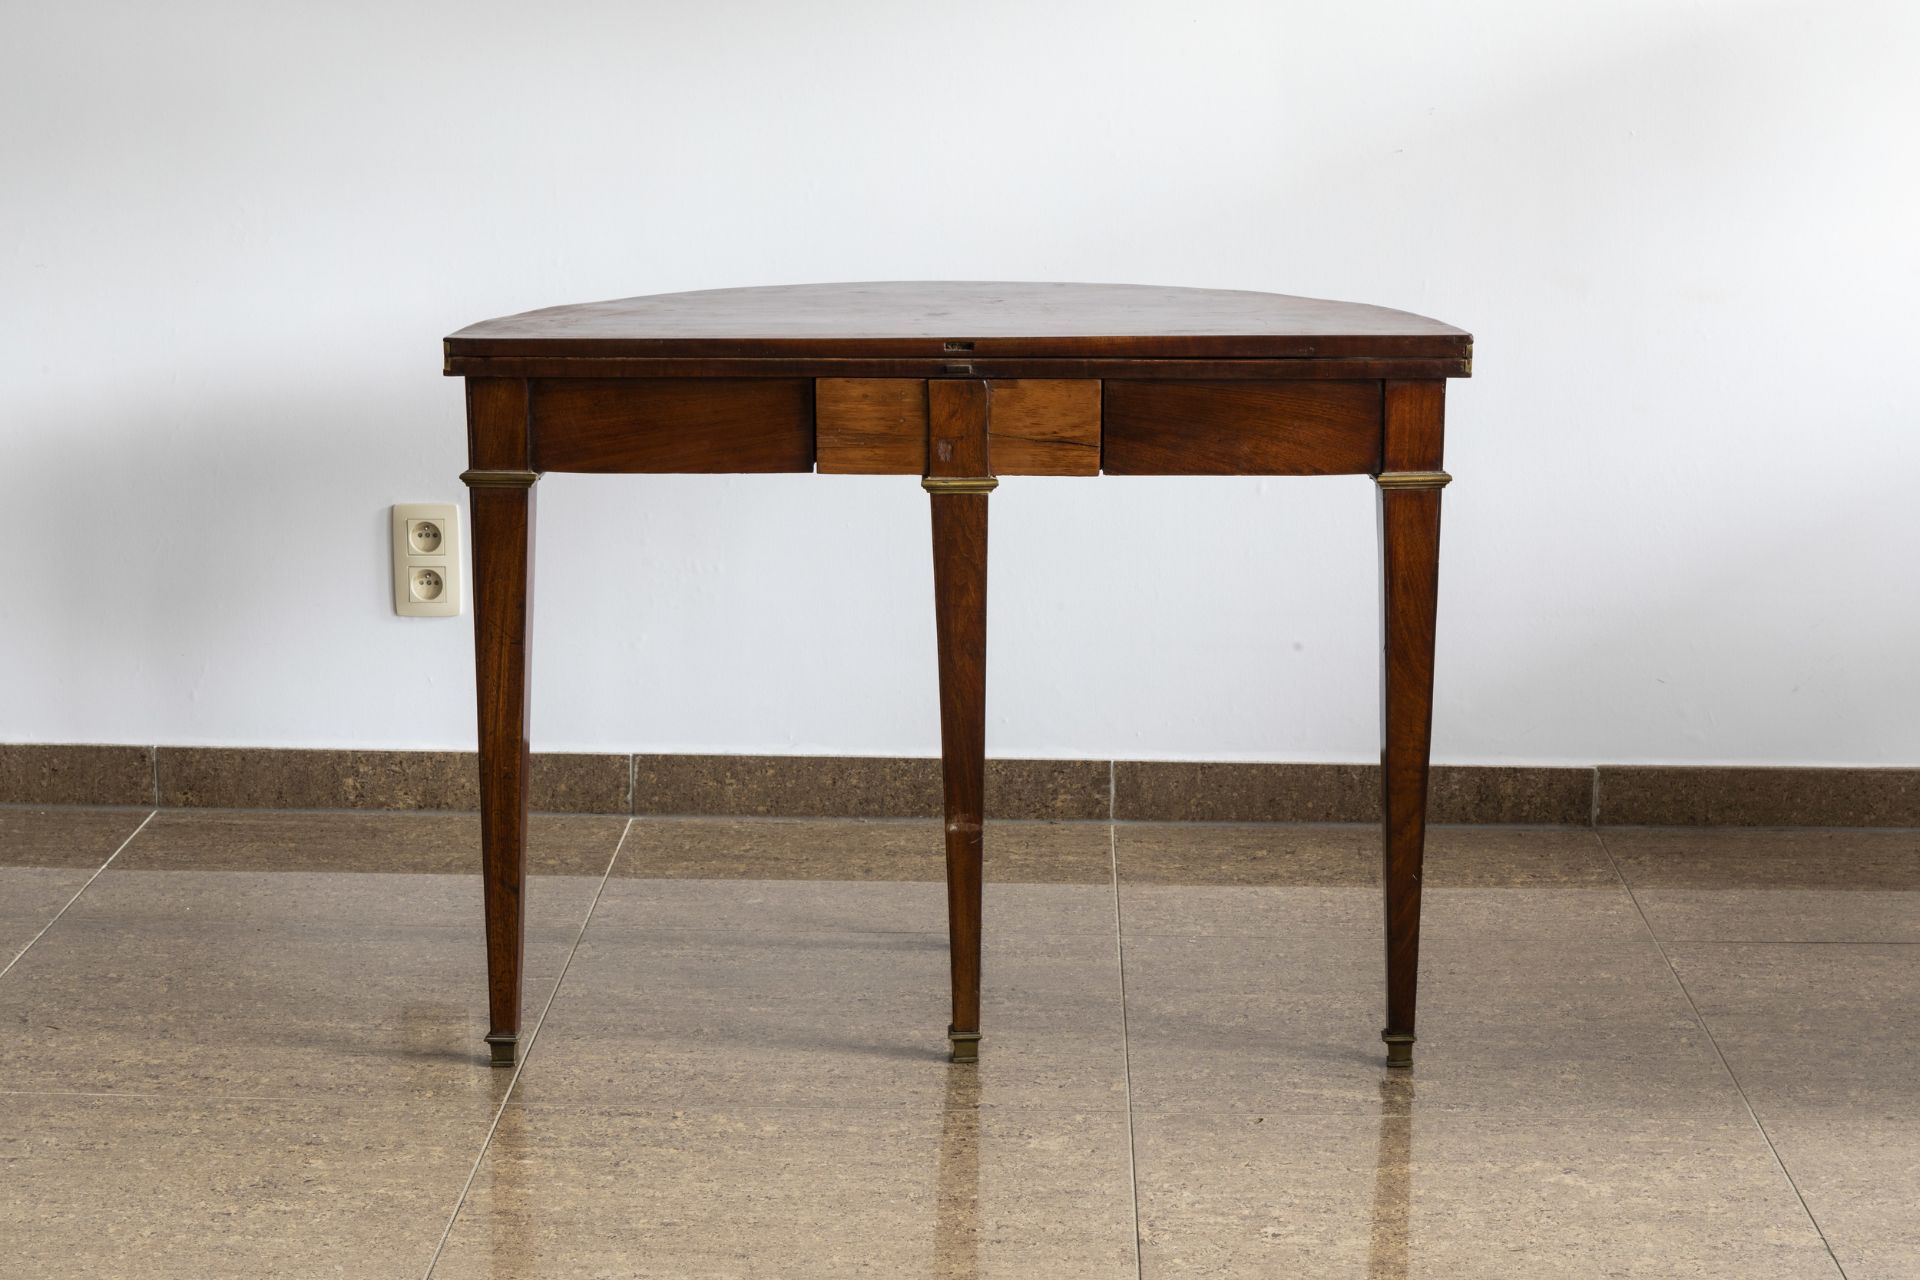 A French Directoire wood 'demi lune' console table, ca. 1800 - Image 2 of 11